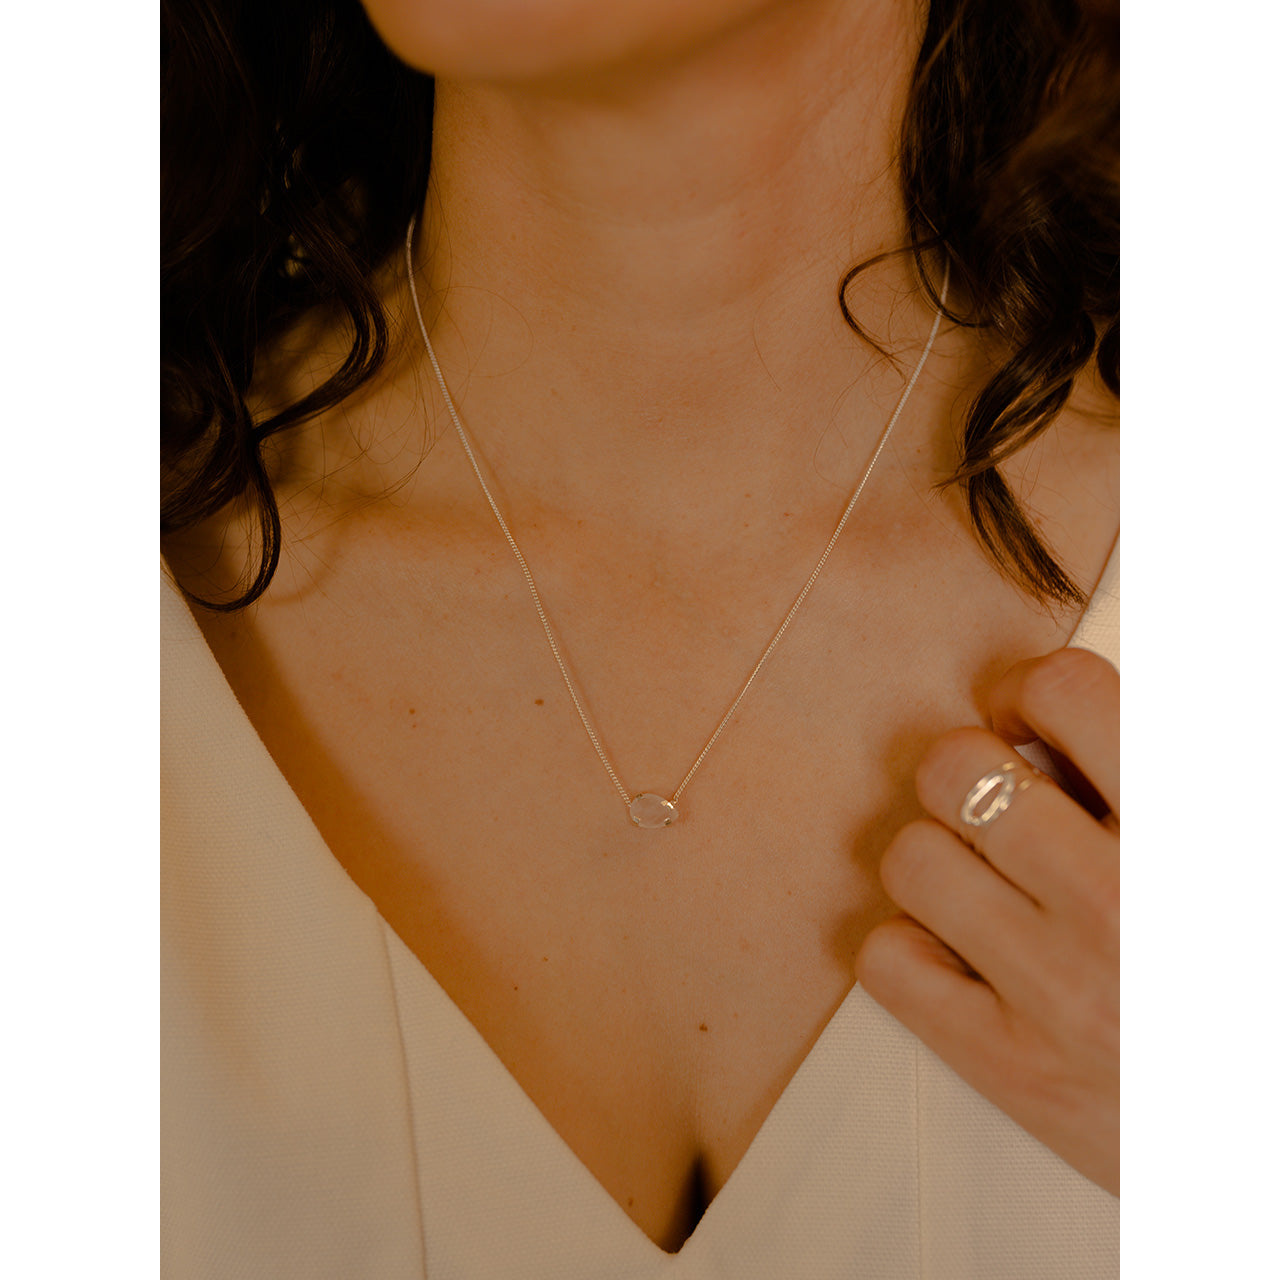 This delicately crafted necklace features a drop-shaped pink quartz stone held securely by a four-prong setting.